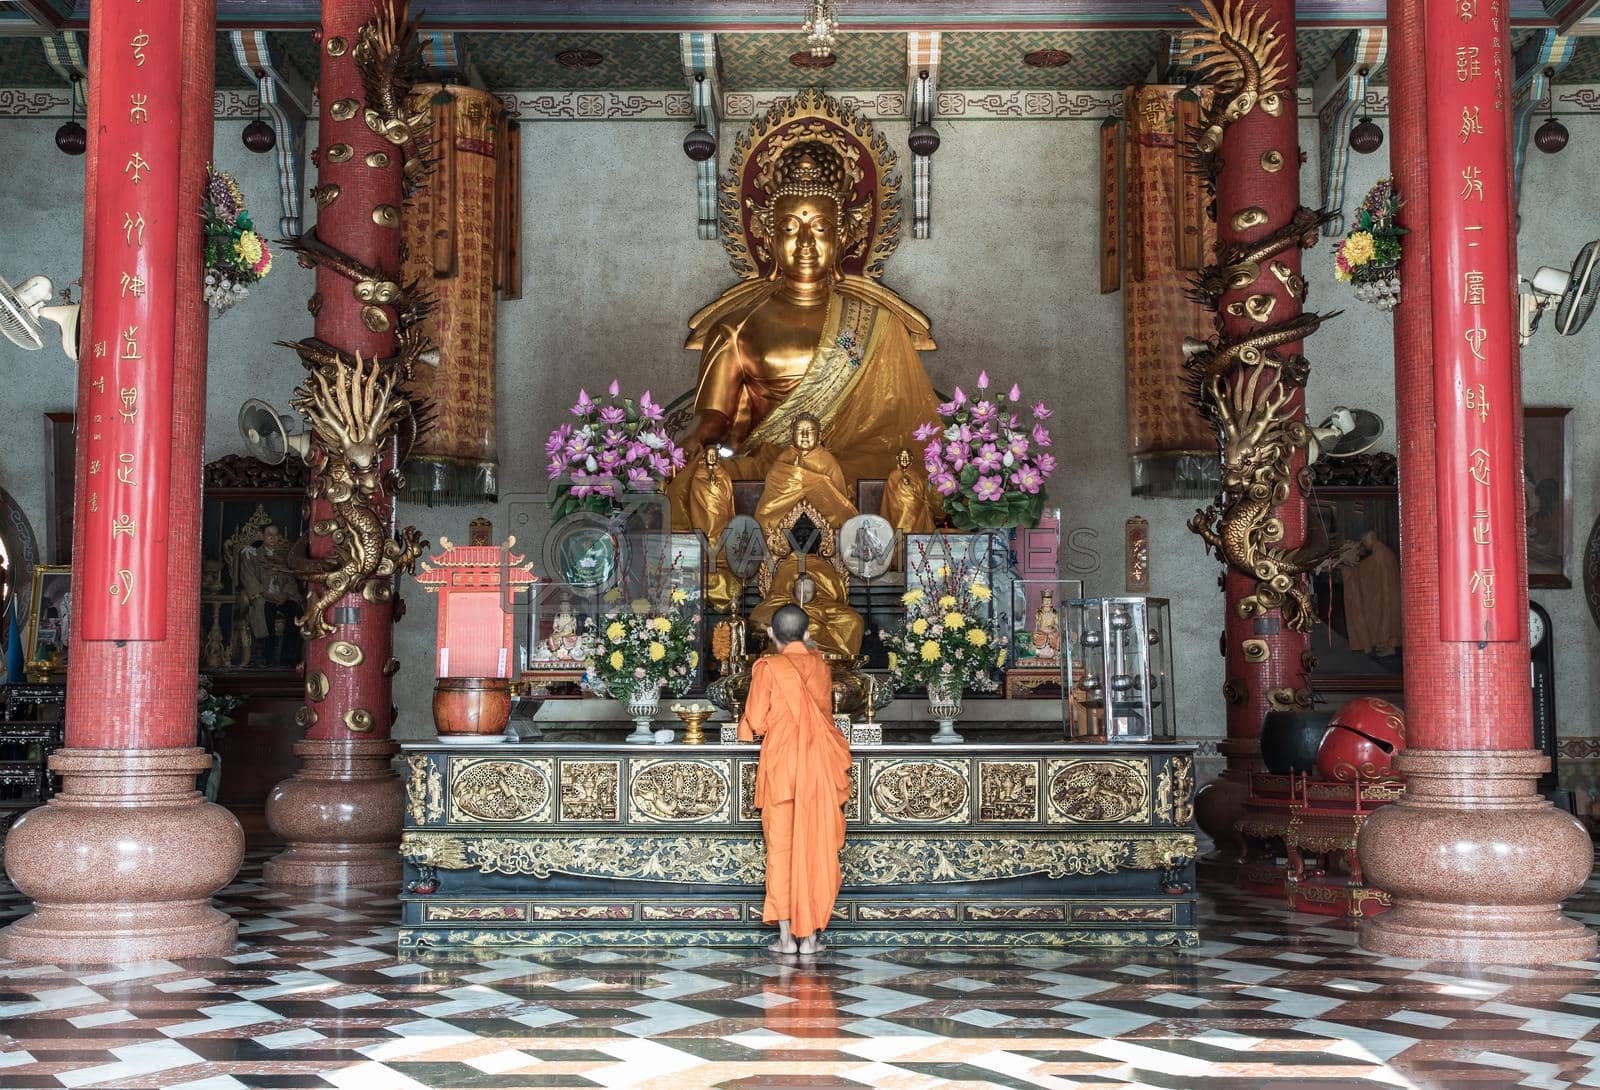 Bangkok, Thailand - Feb 08, 2020 : A buddhist Monk is worshiping and praying pay respect in front of the Golden buddha statue inside the Wat Bhoman Khunaram (Bhoman Khunaram Temple). Worship pray meditate to calm the mind, Focus and blur.